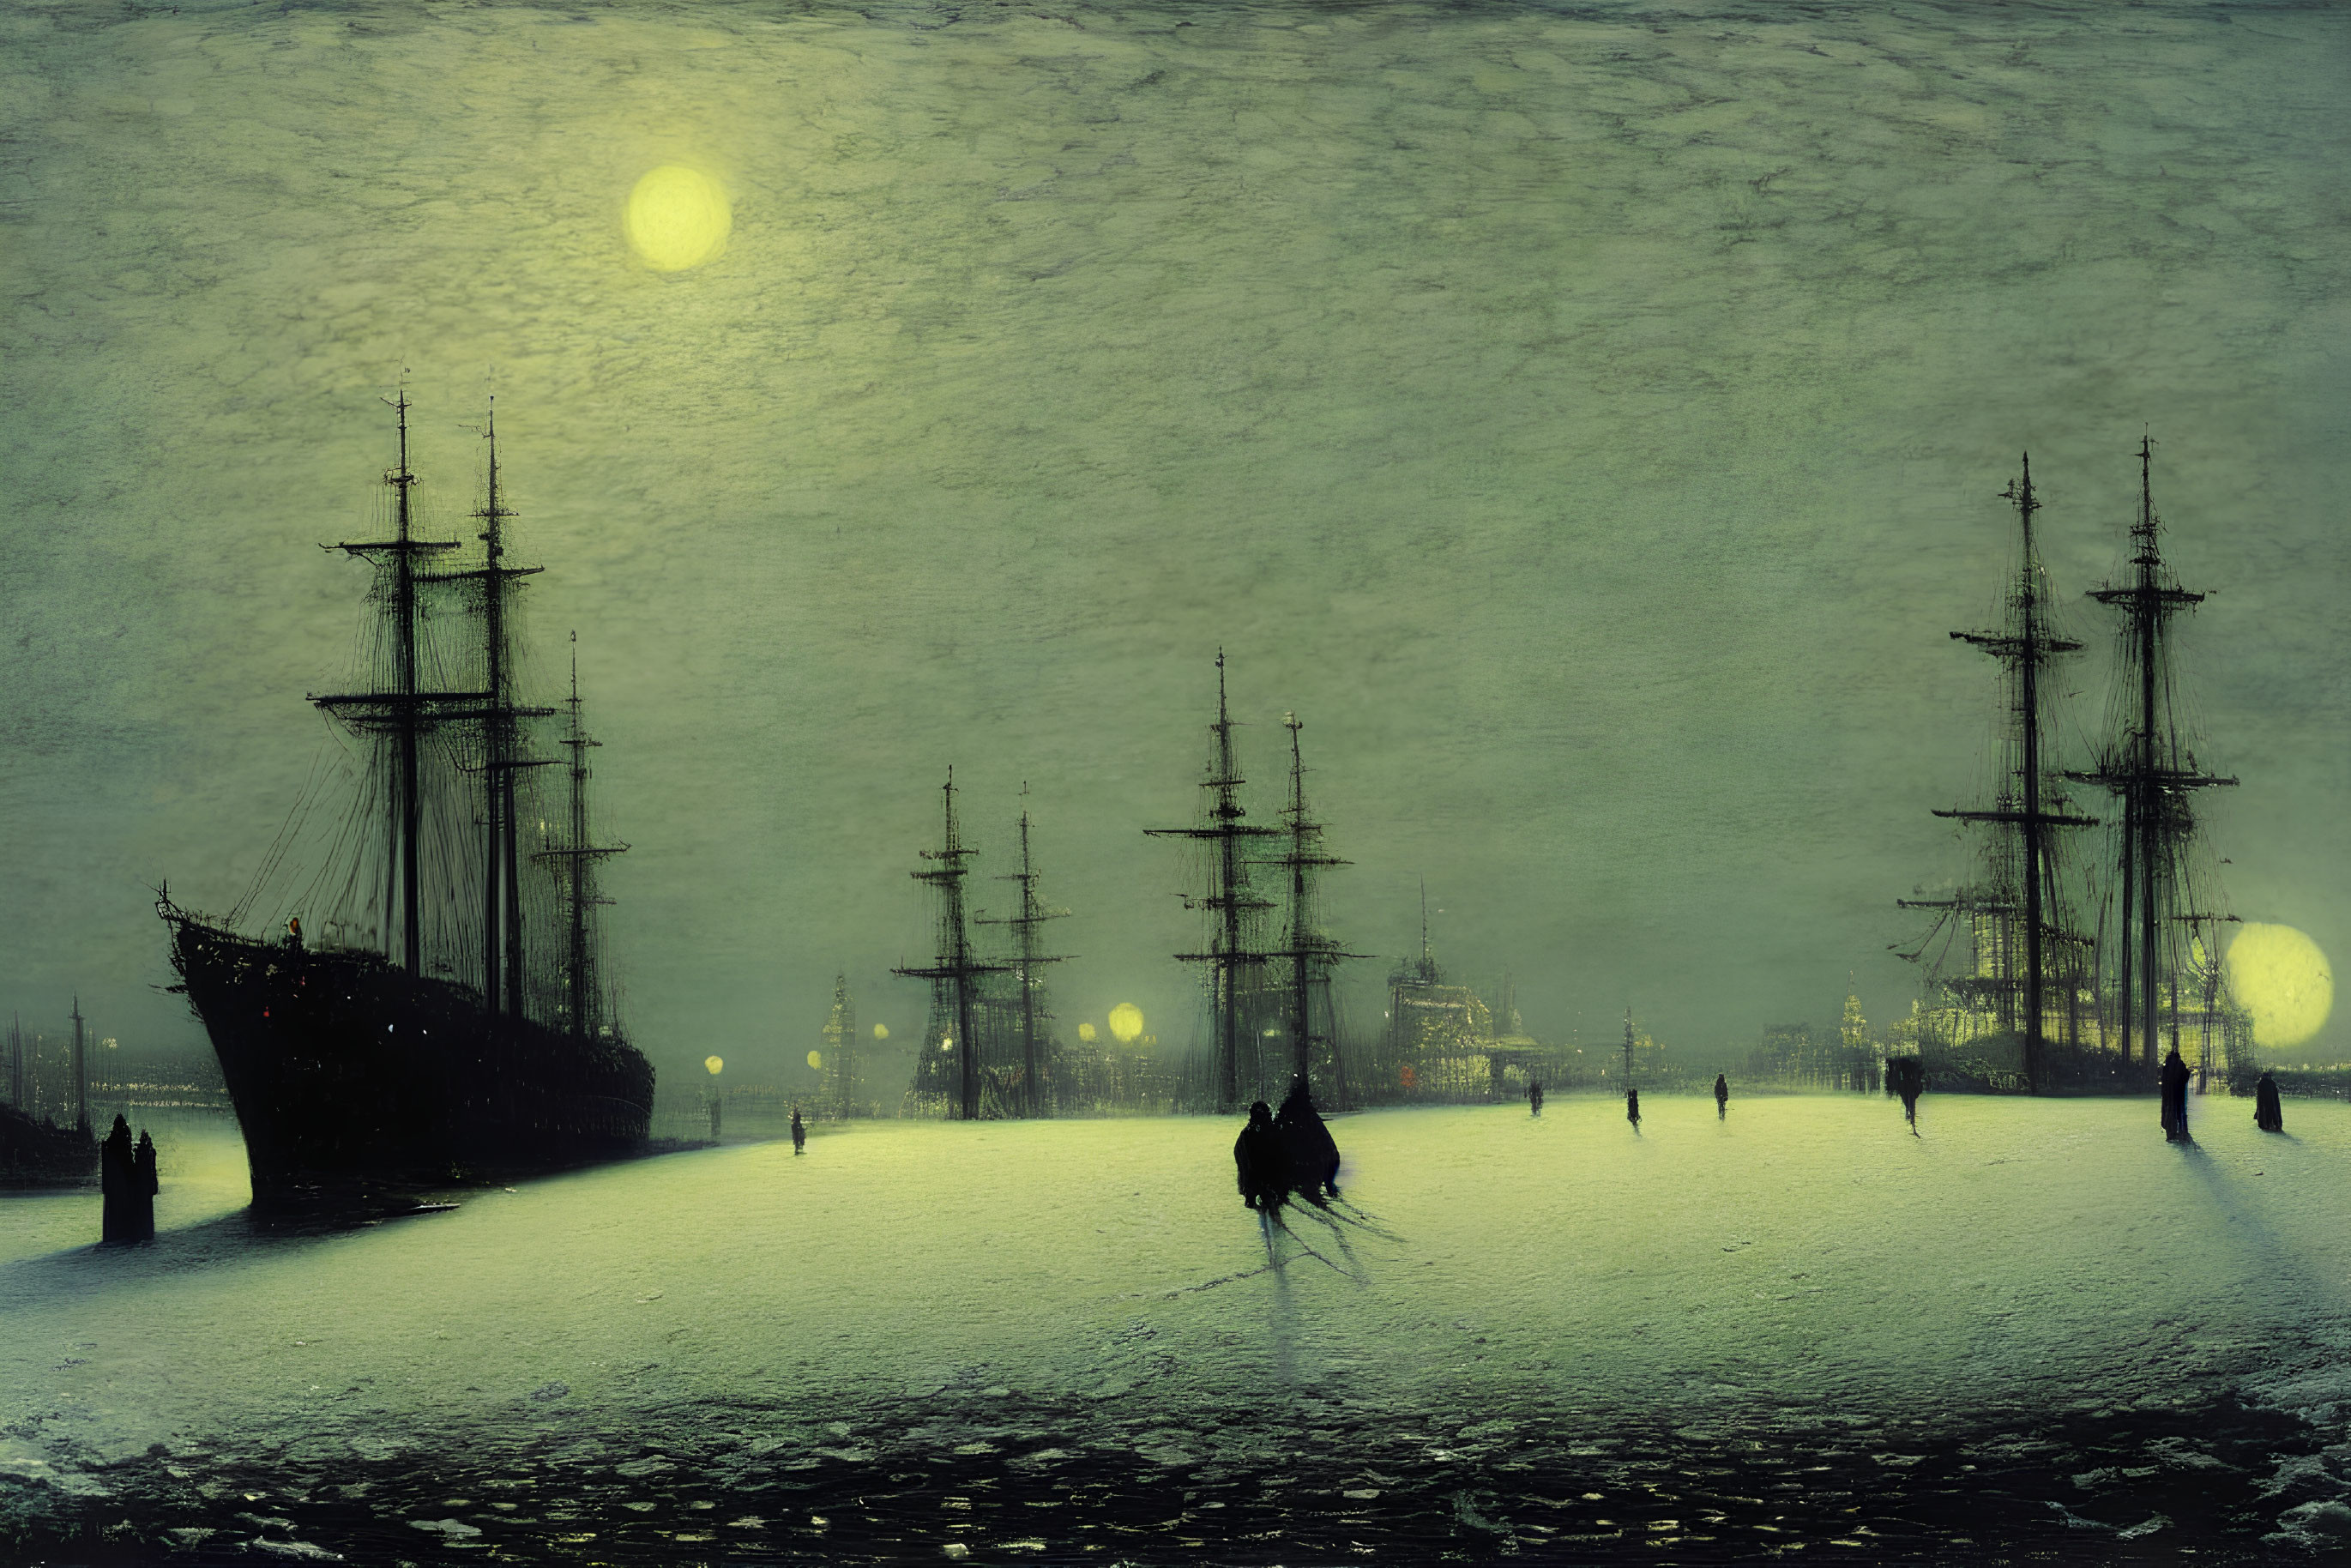 Snow-covered harbor at night with tall ships and glowing orbs under green sky